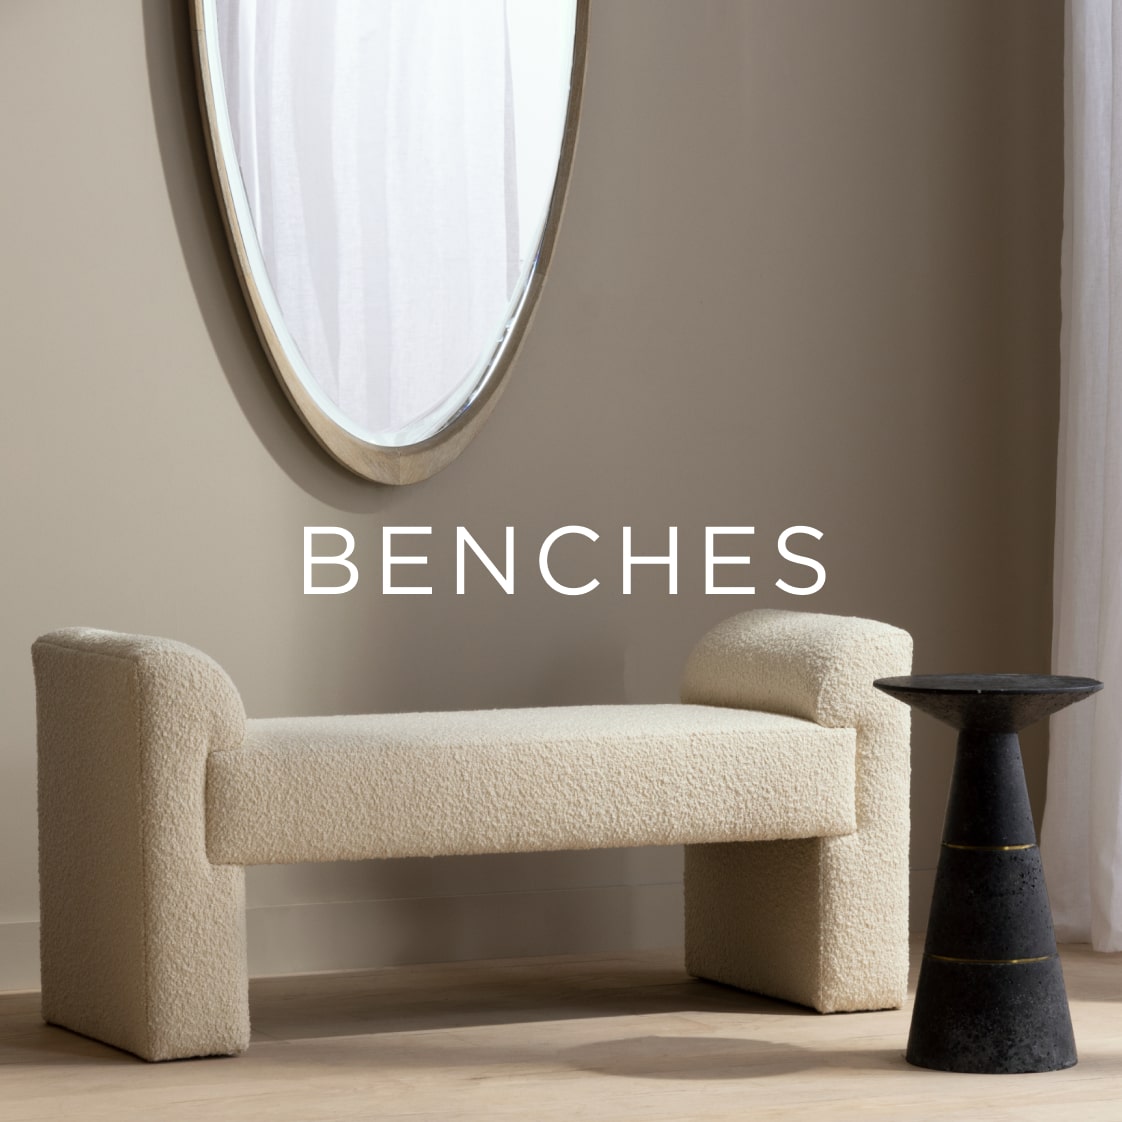 Arteriors stools and benches